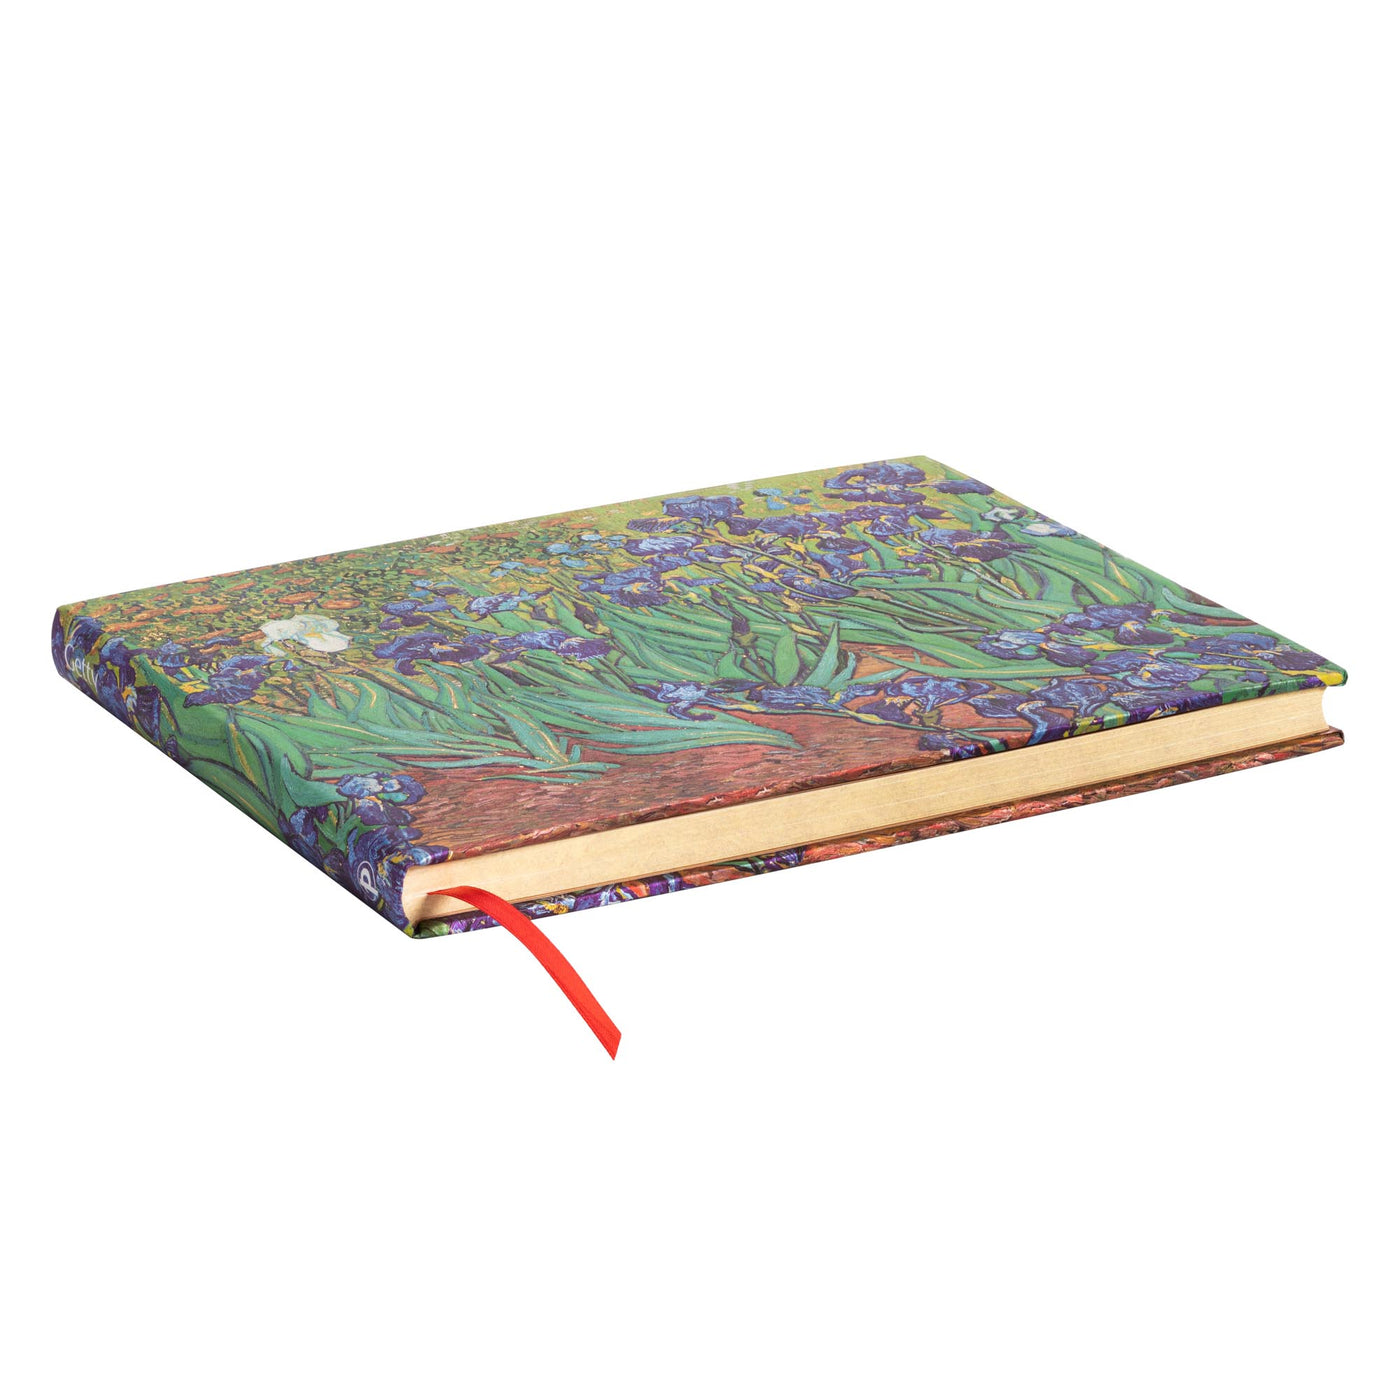 Paperblanks Ultra Van Gogh's Irises  9 x 7 Inches Guest Book